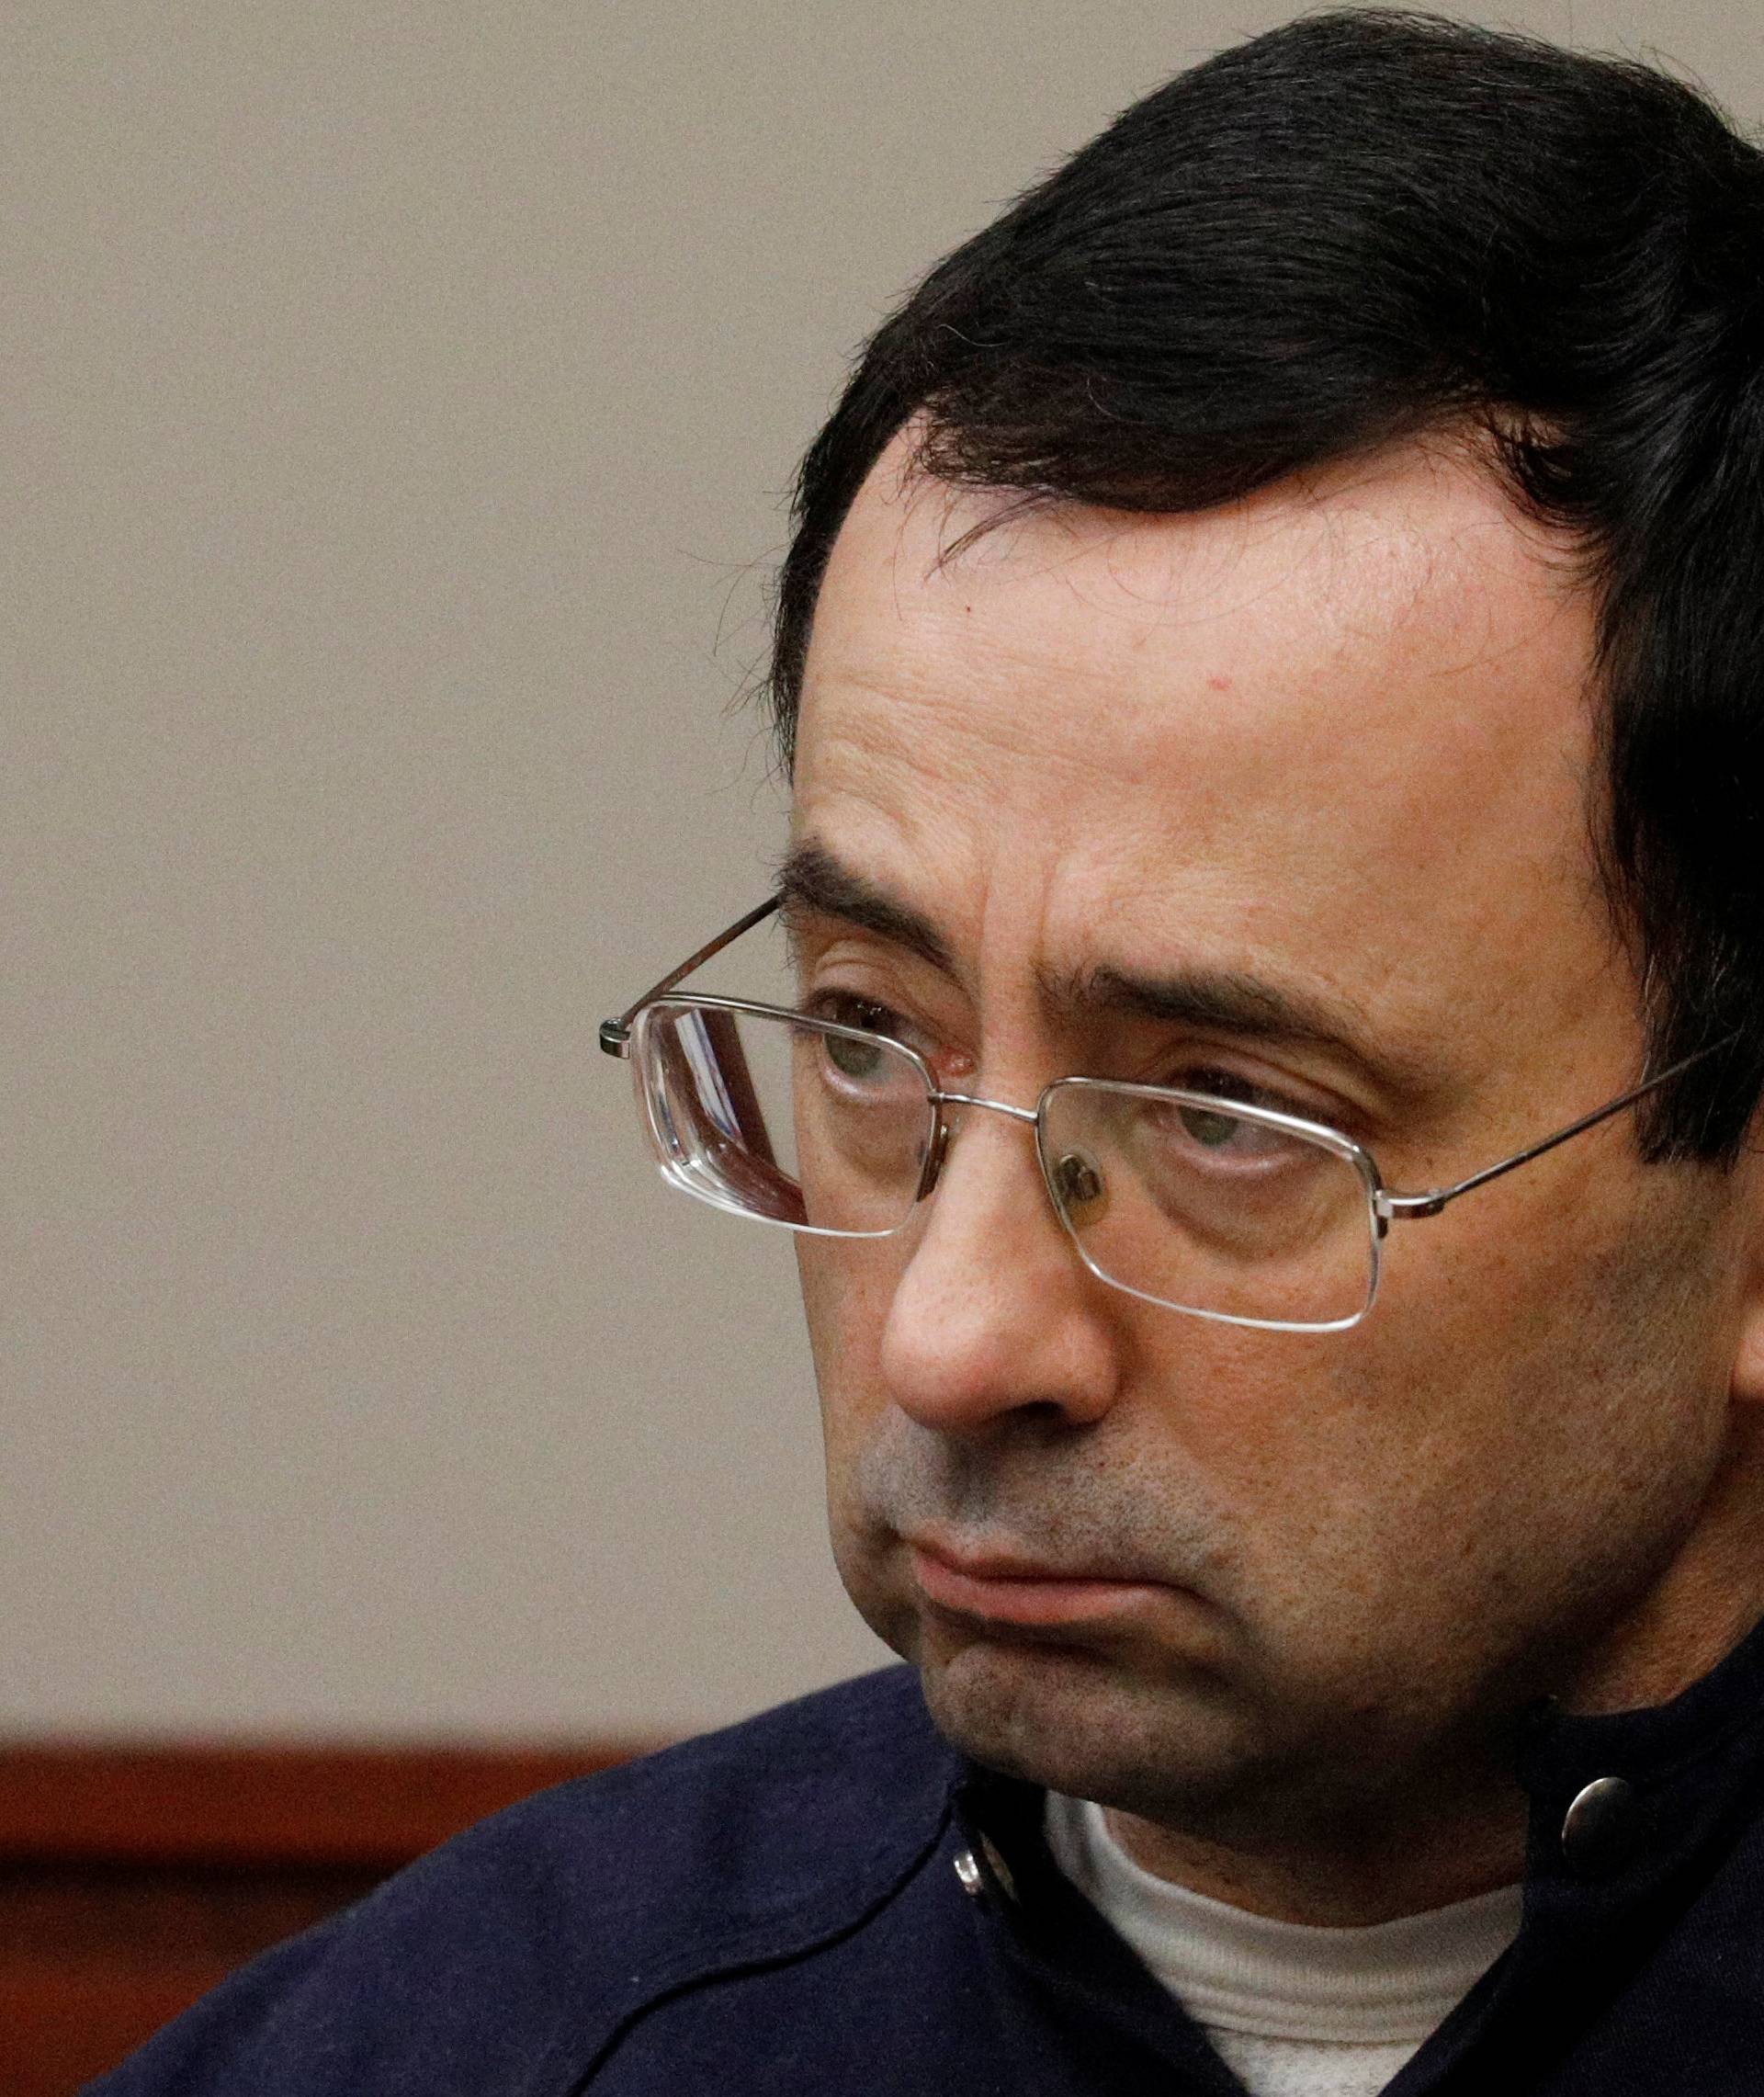 Larry Nassar, a former team USA Gymnastics doctor who pleaded guilty in November 2017 to sexual assault charges, sits in the courtroom during his sentencing hearing in Lansing, Michigan